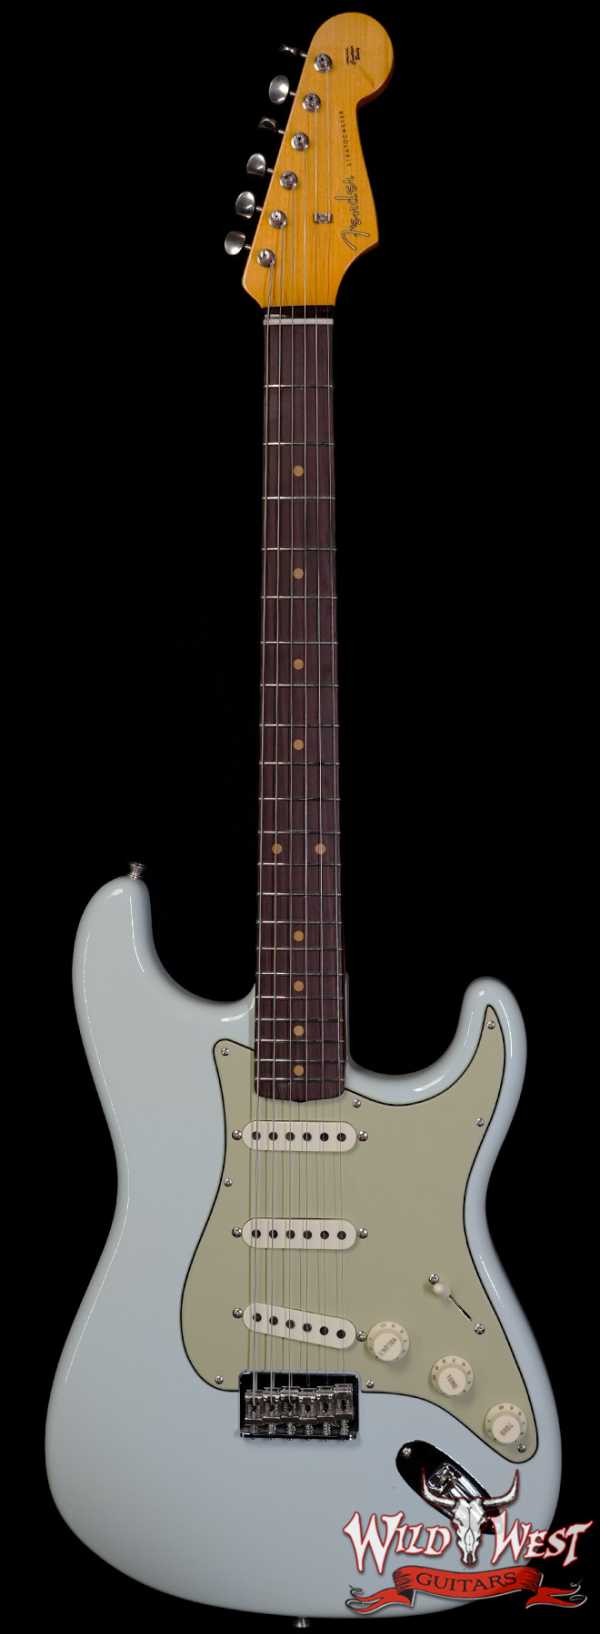 Fender Custom Shop Vintage Custom ‘59 1959 Hardtail Stratocaster Time Capsule Package Faded Aged Sonic Blue 7.35 LBS